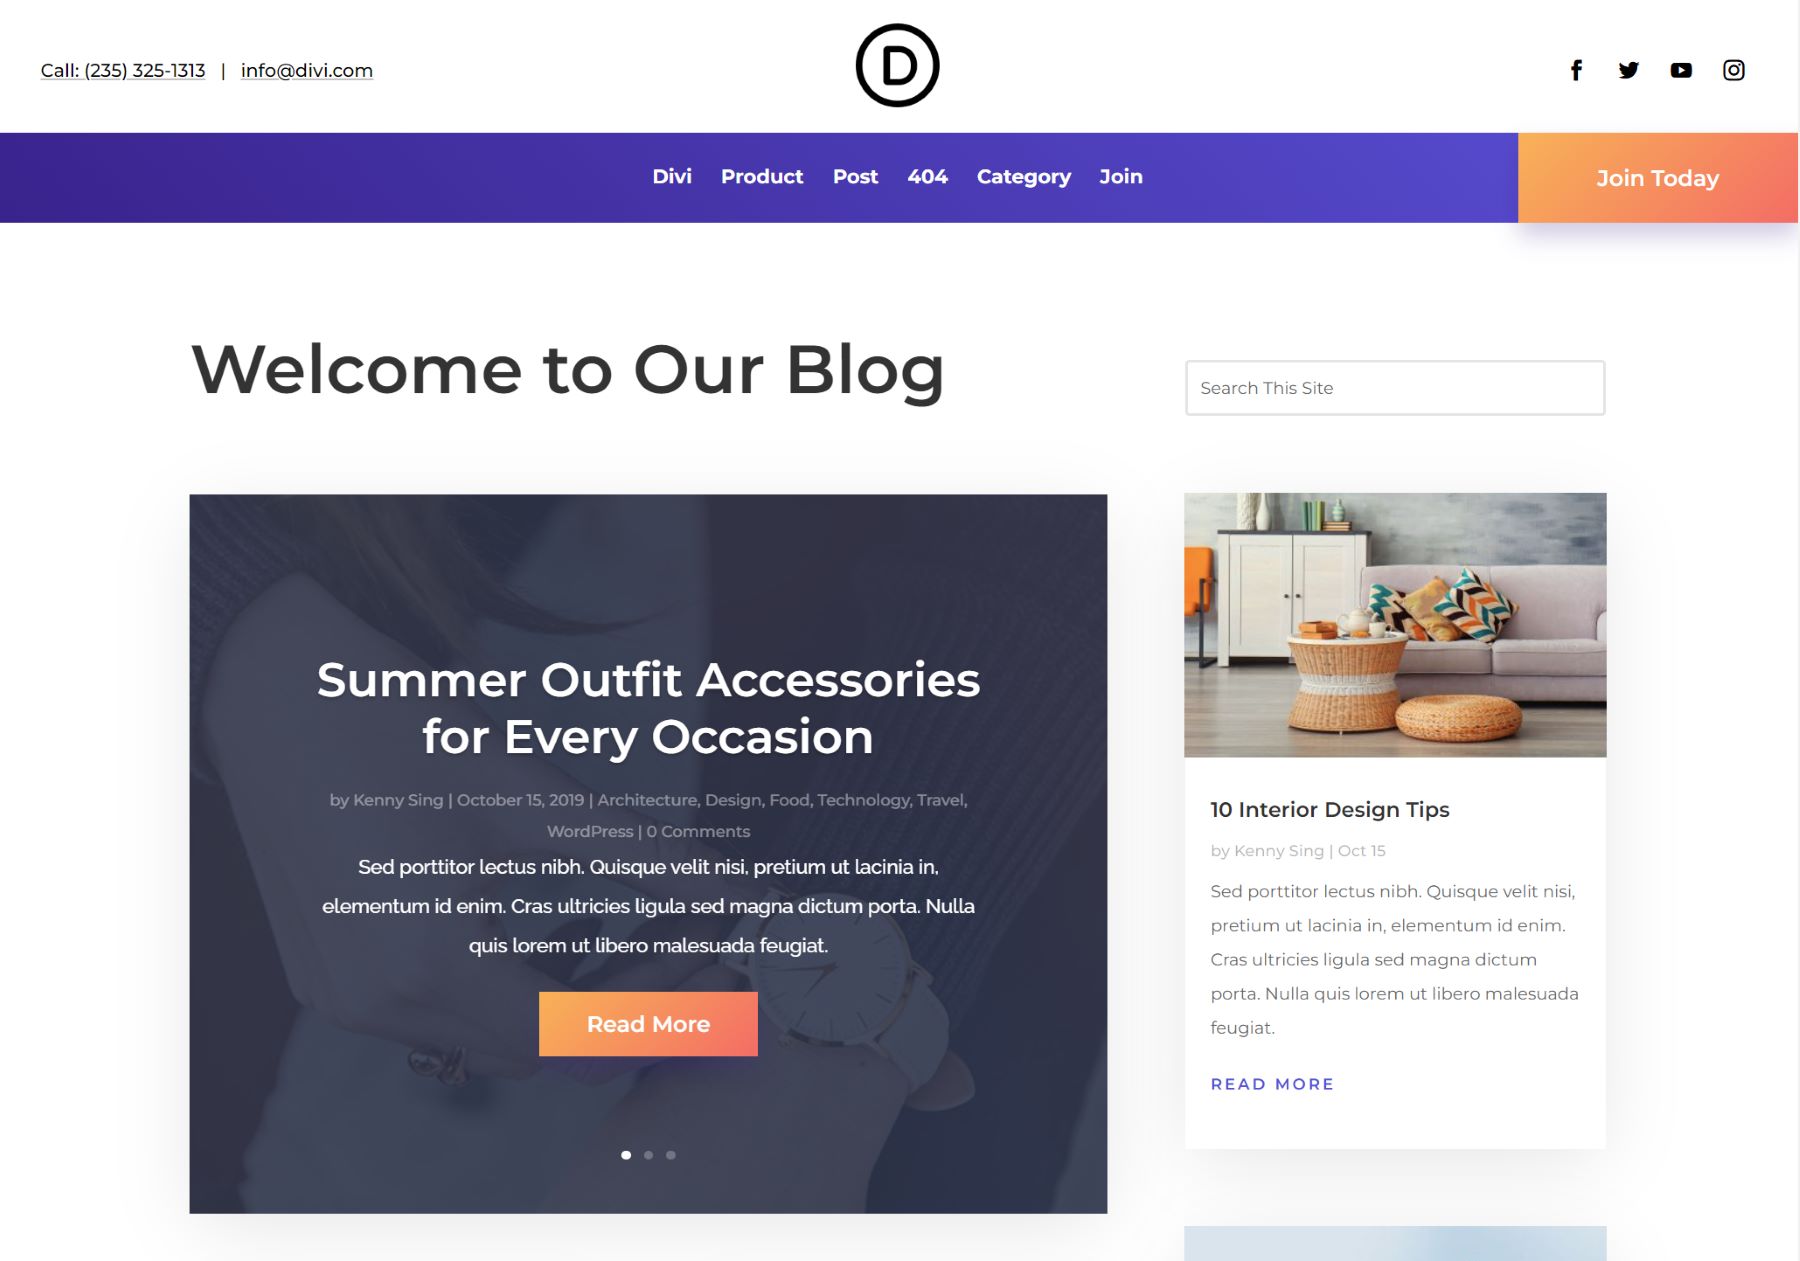 Divi for Bloggers